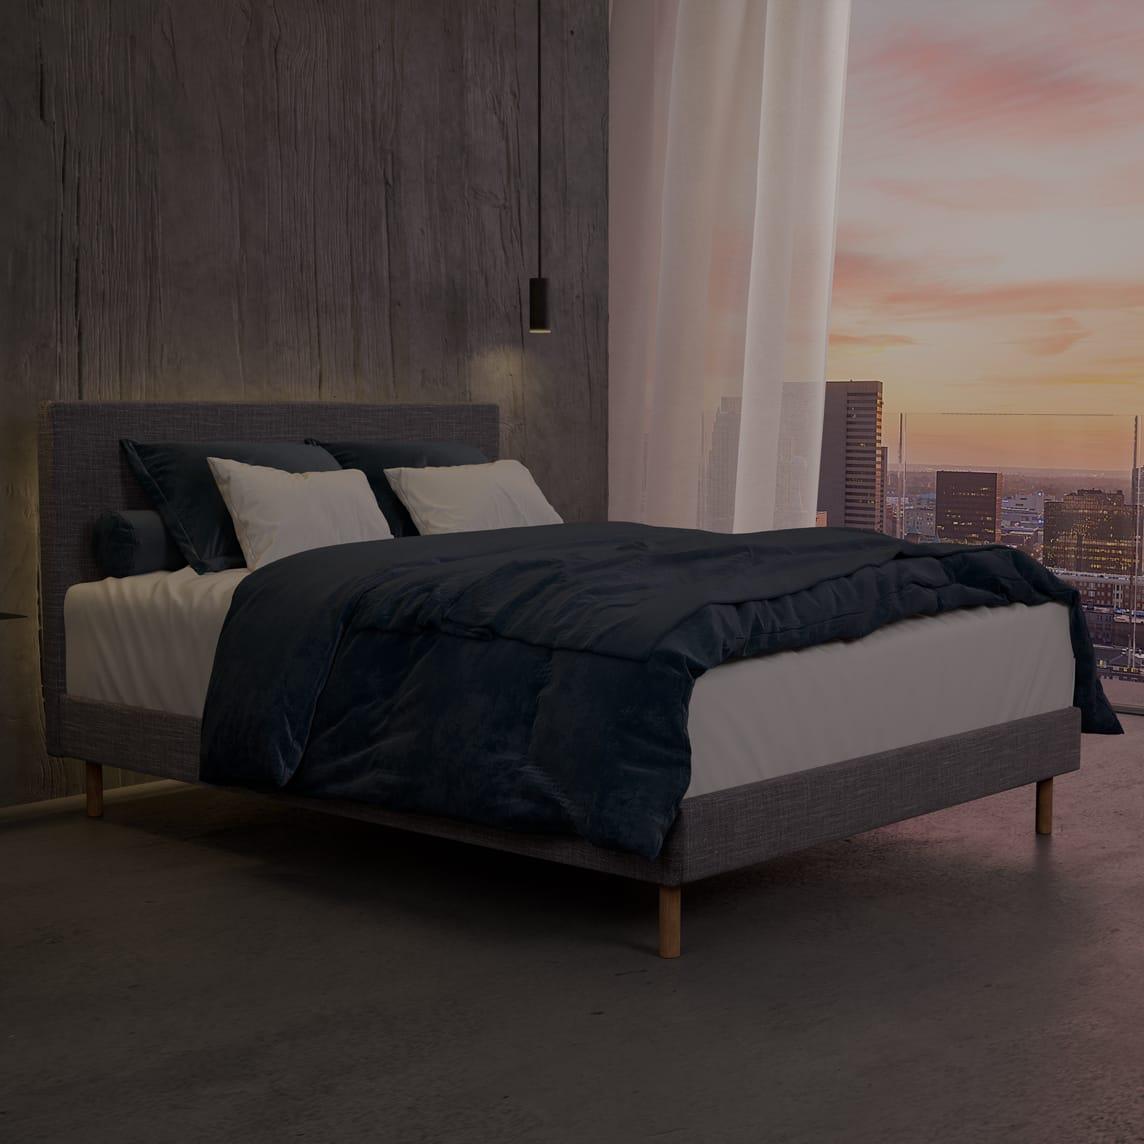 The Boyd SD Indestruct Bed in Charcoal, in an industrial bedroom overlooking a morning city skyline.